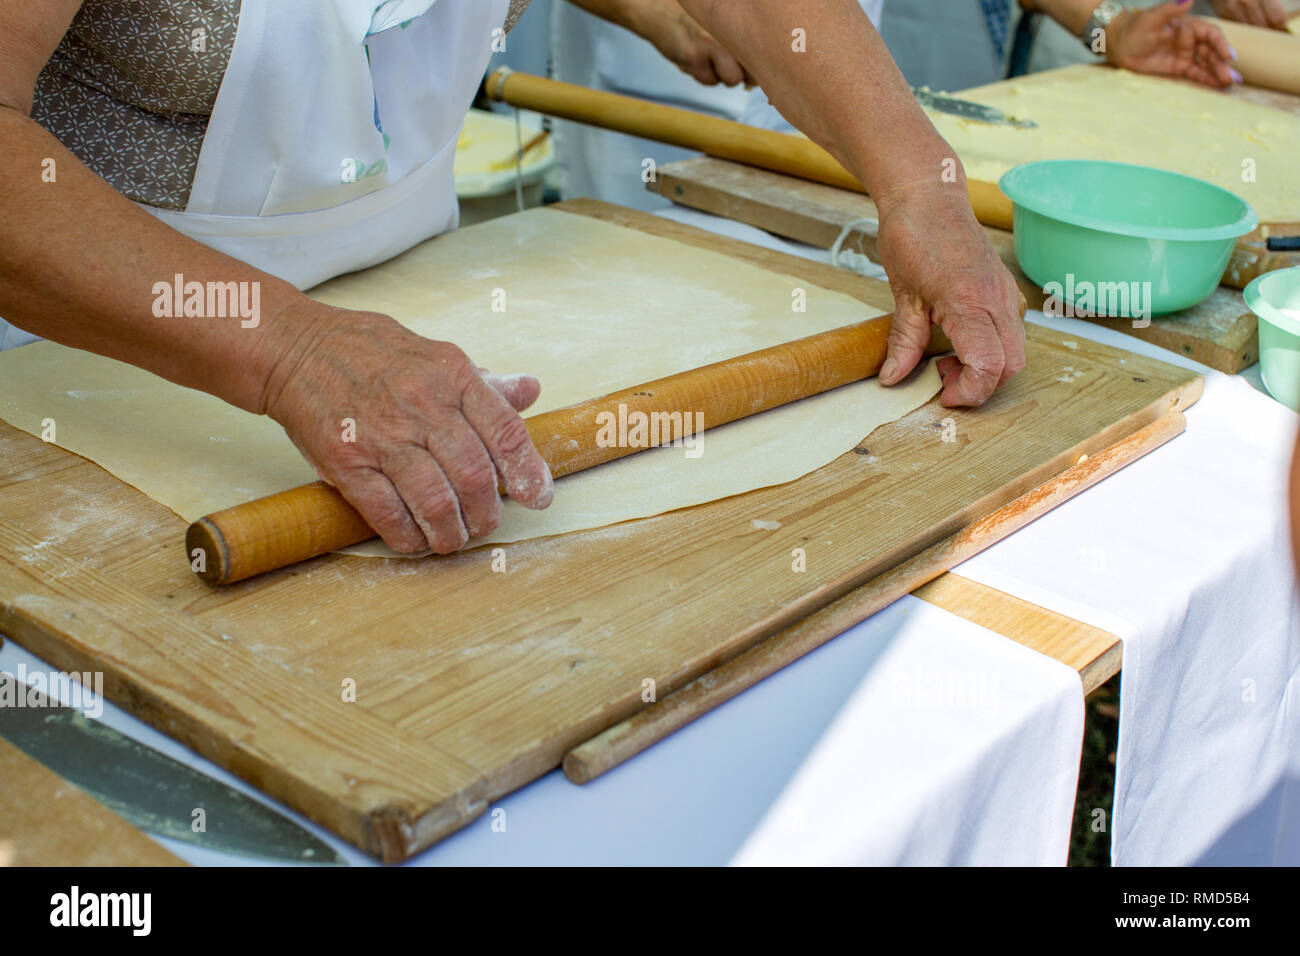 Old wrinkled hands of elderly woman rolling out dough with rolling pin on a wooden cutting board. Concept - benefits of cooking at home, active life i Stock Photo